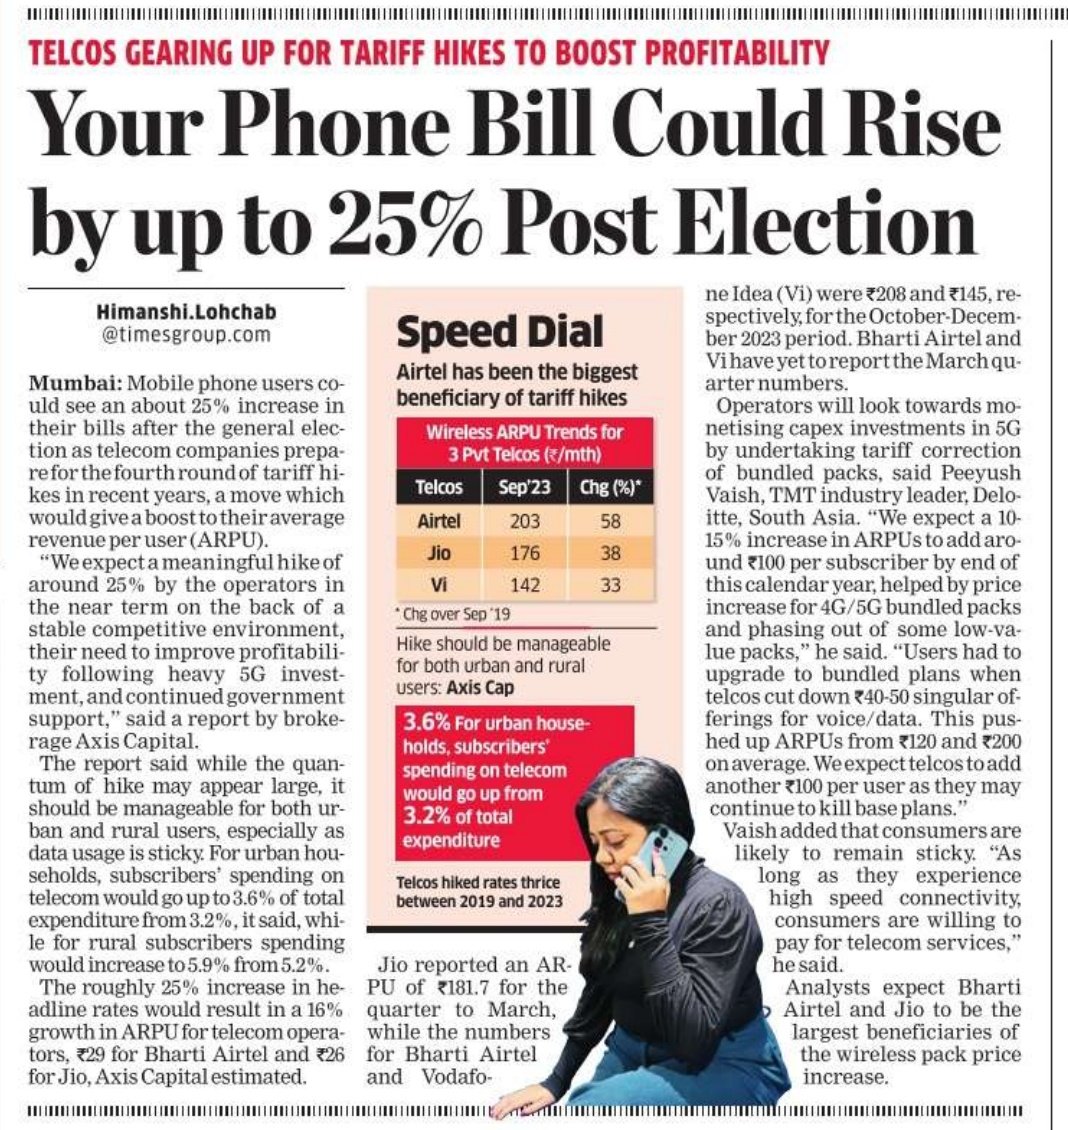 The Indian capitalists are quietly waiting for the elections to end so they can increase their profits by squeezing the public. This would kill the middle class category of India. Who has mobile phones & using the internet. They won't be able to pay the prices for their